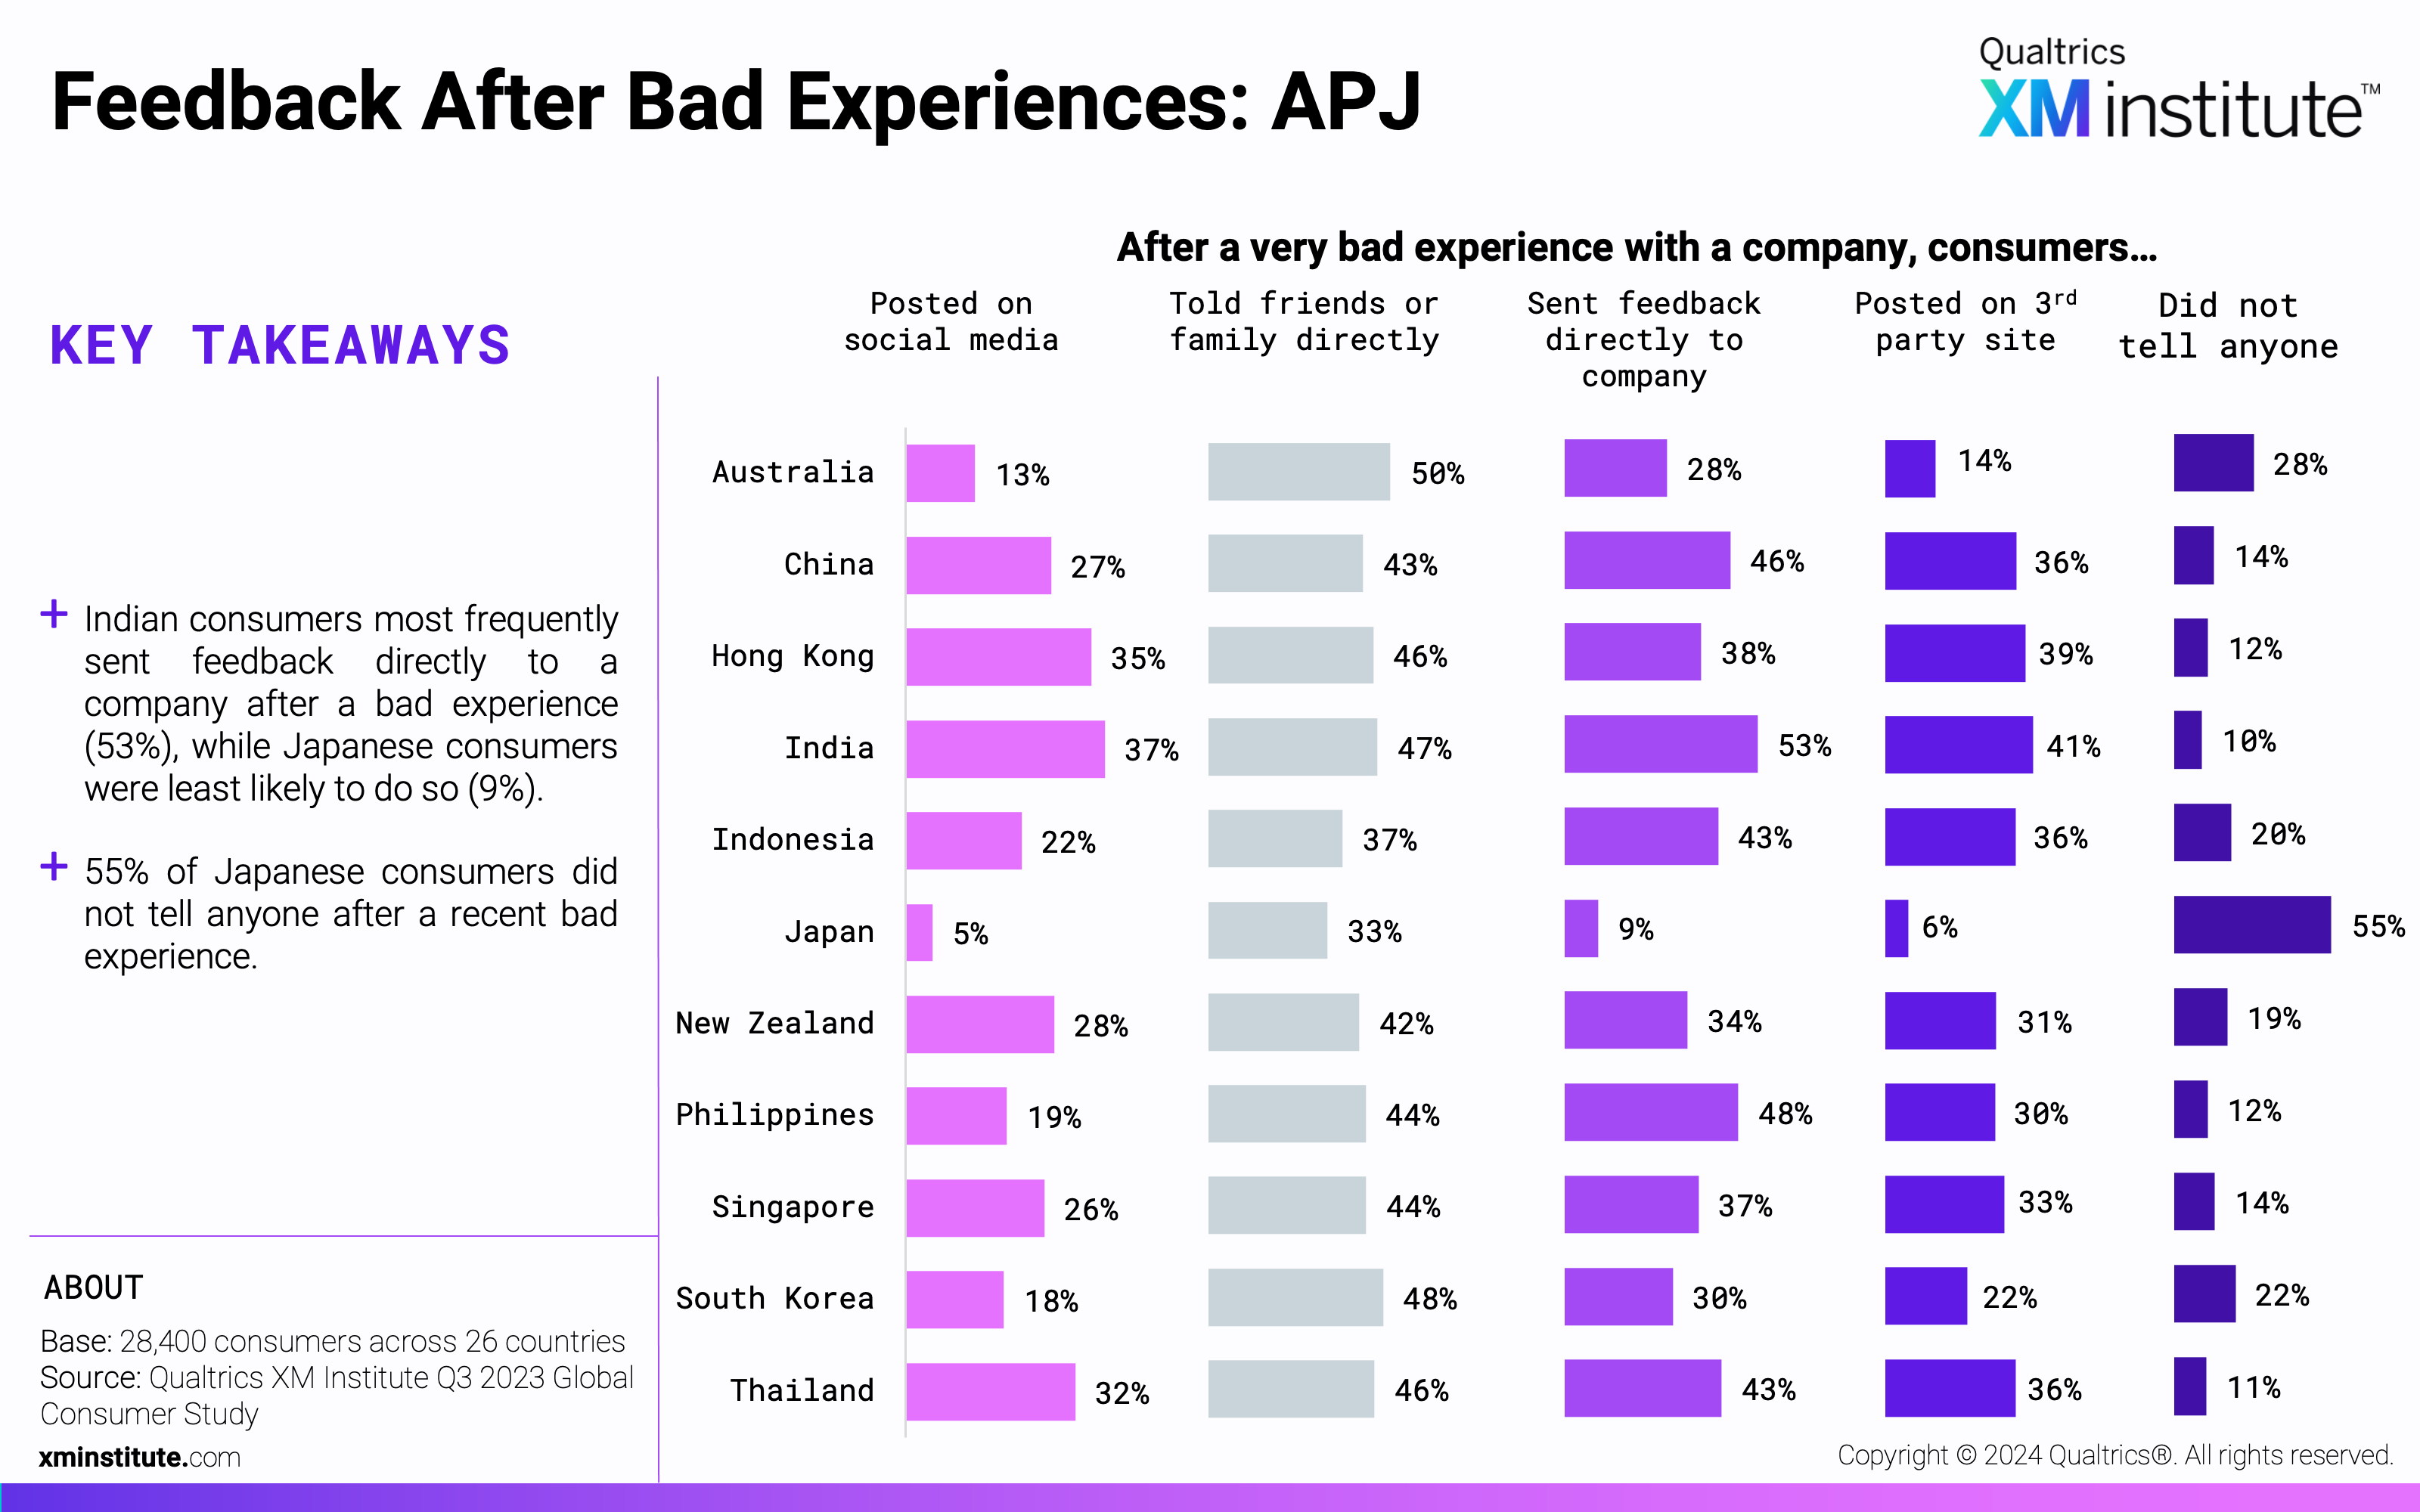 These charts show the percentage of consumers from each country that shared feedback using each method after a bad experience with a company.